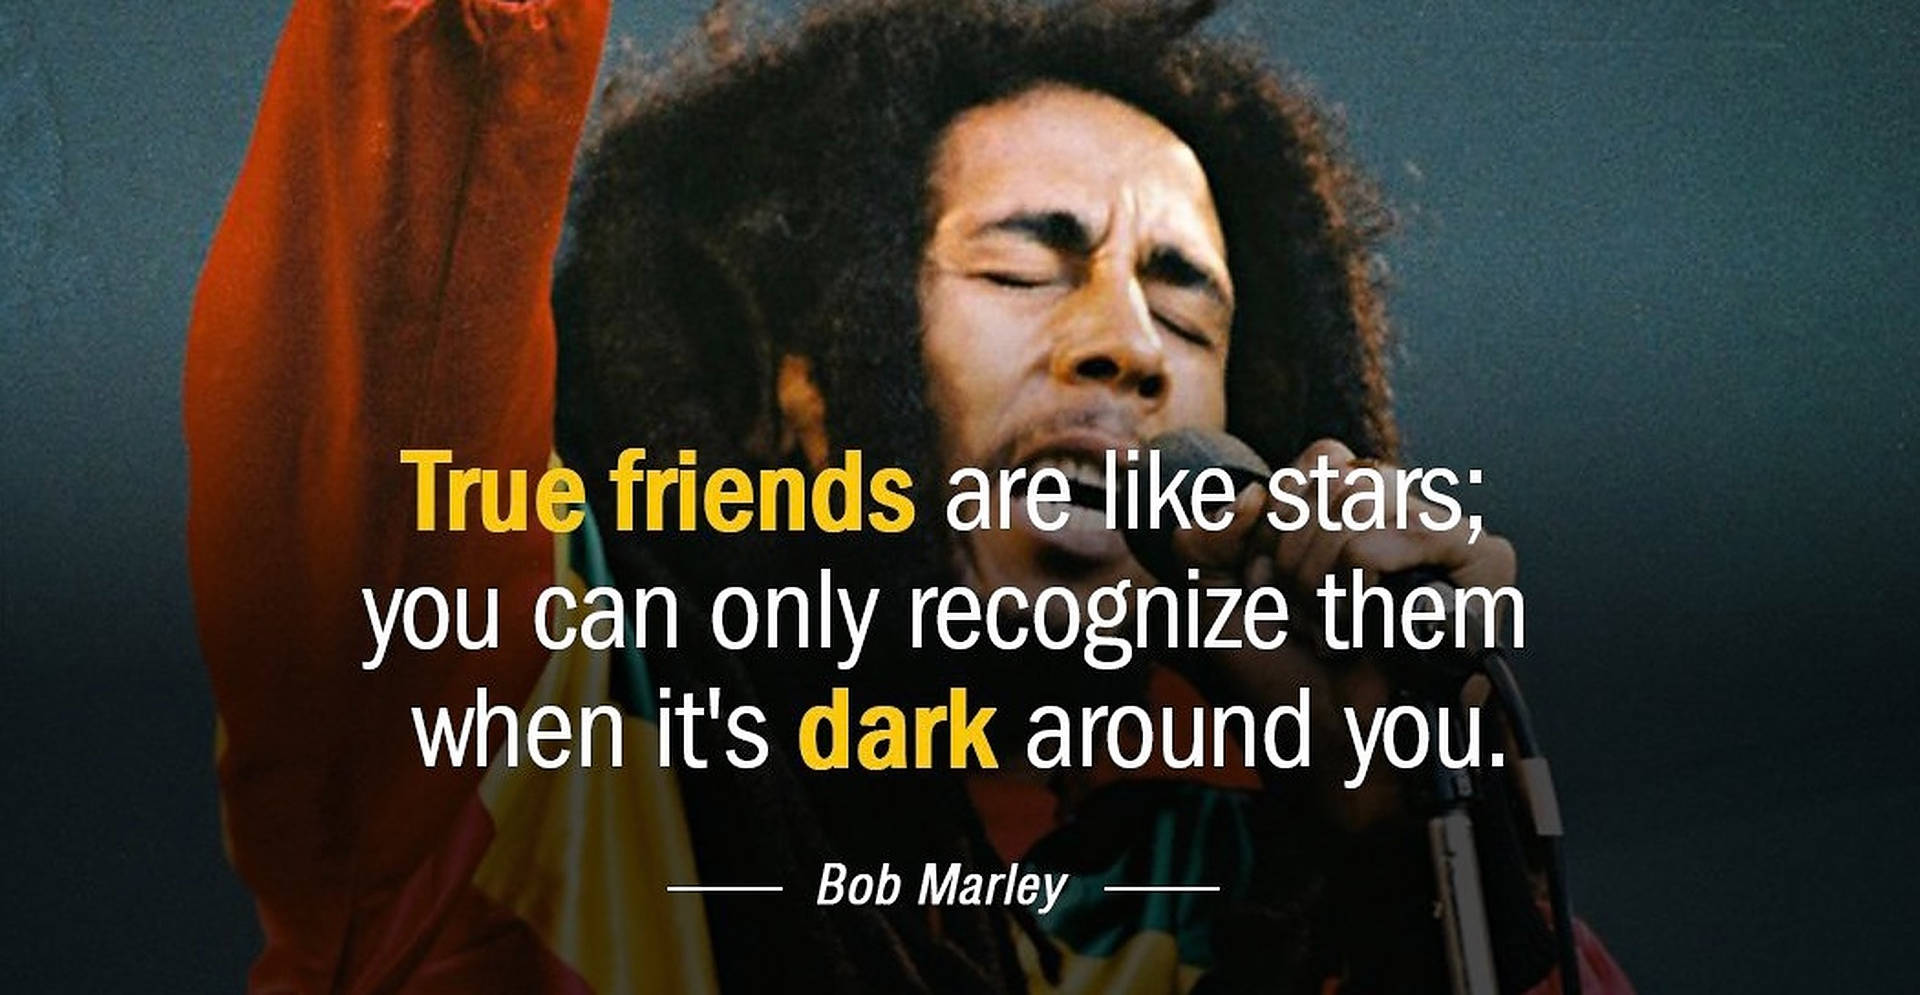 Bob Marley Inspiring Quote - “the Truth Is, Everyone Is Going To Hurt You. You Just Got To Find The Ones Worth Suffering For.”